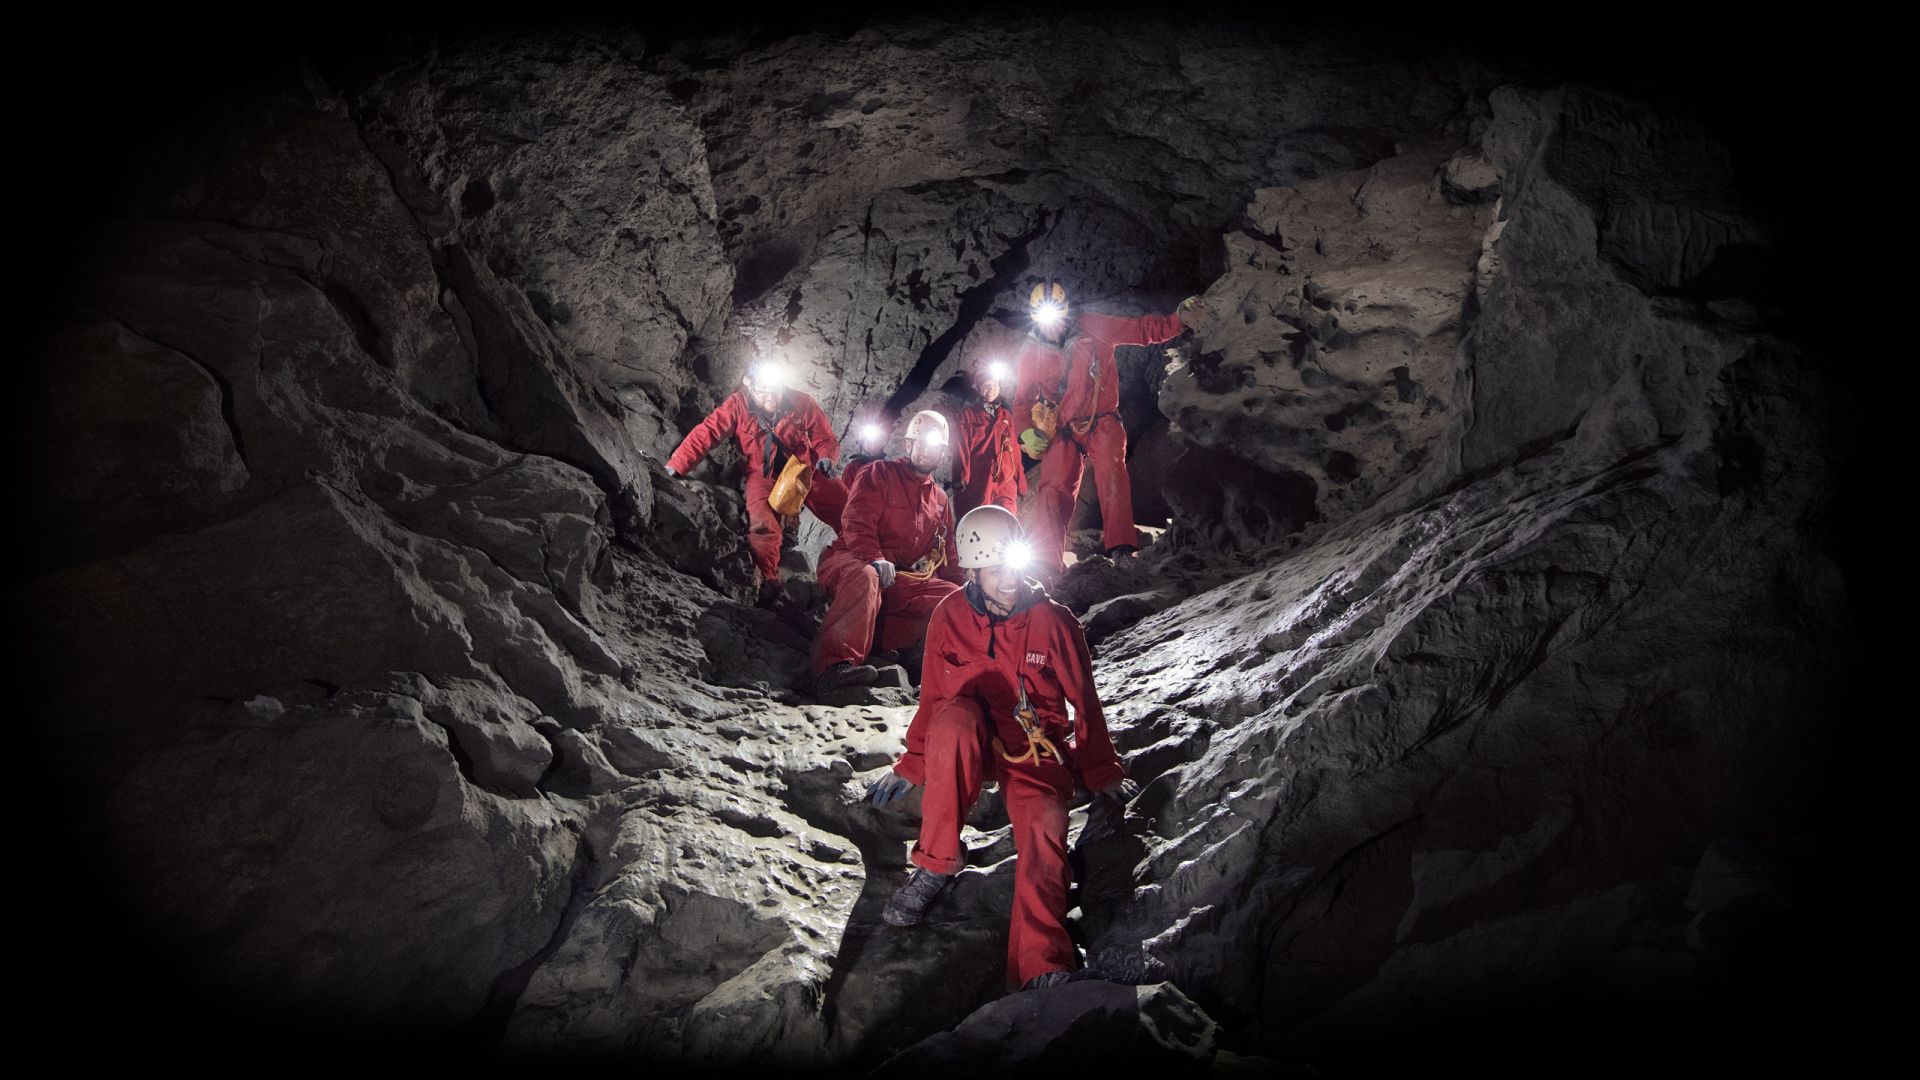 Group descending into the Grand Gallery of Rat's Nest Cave